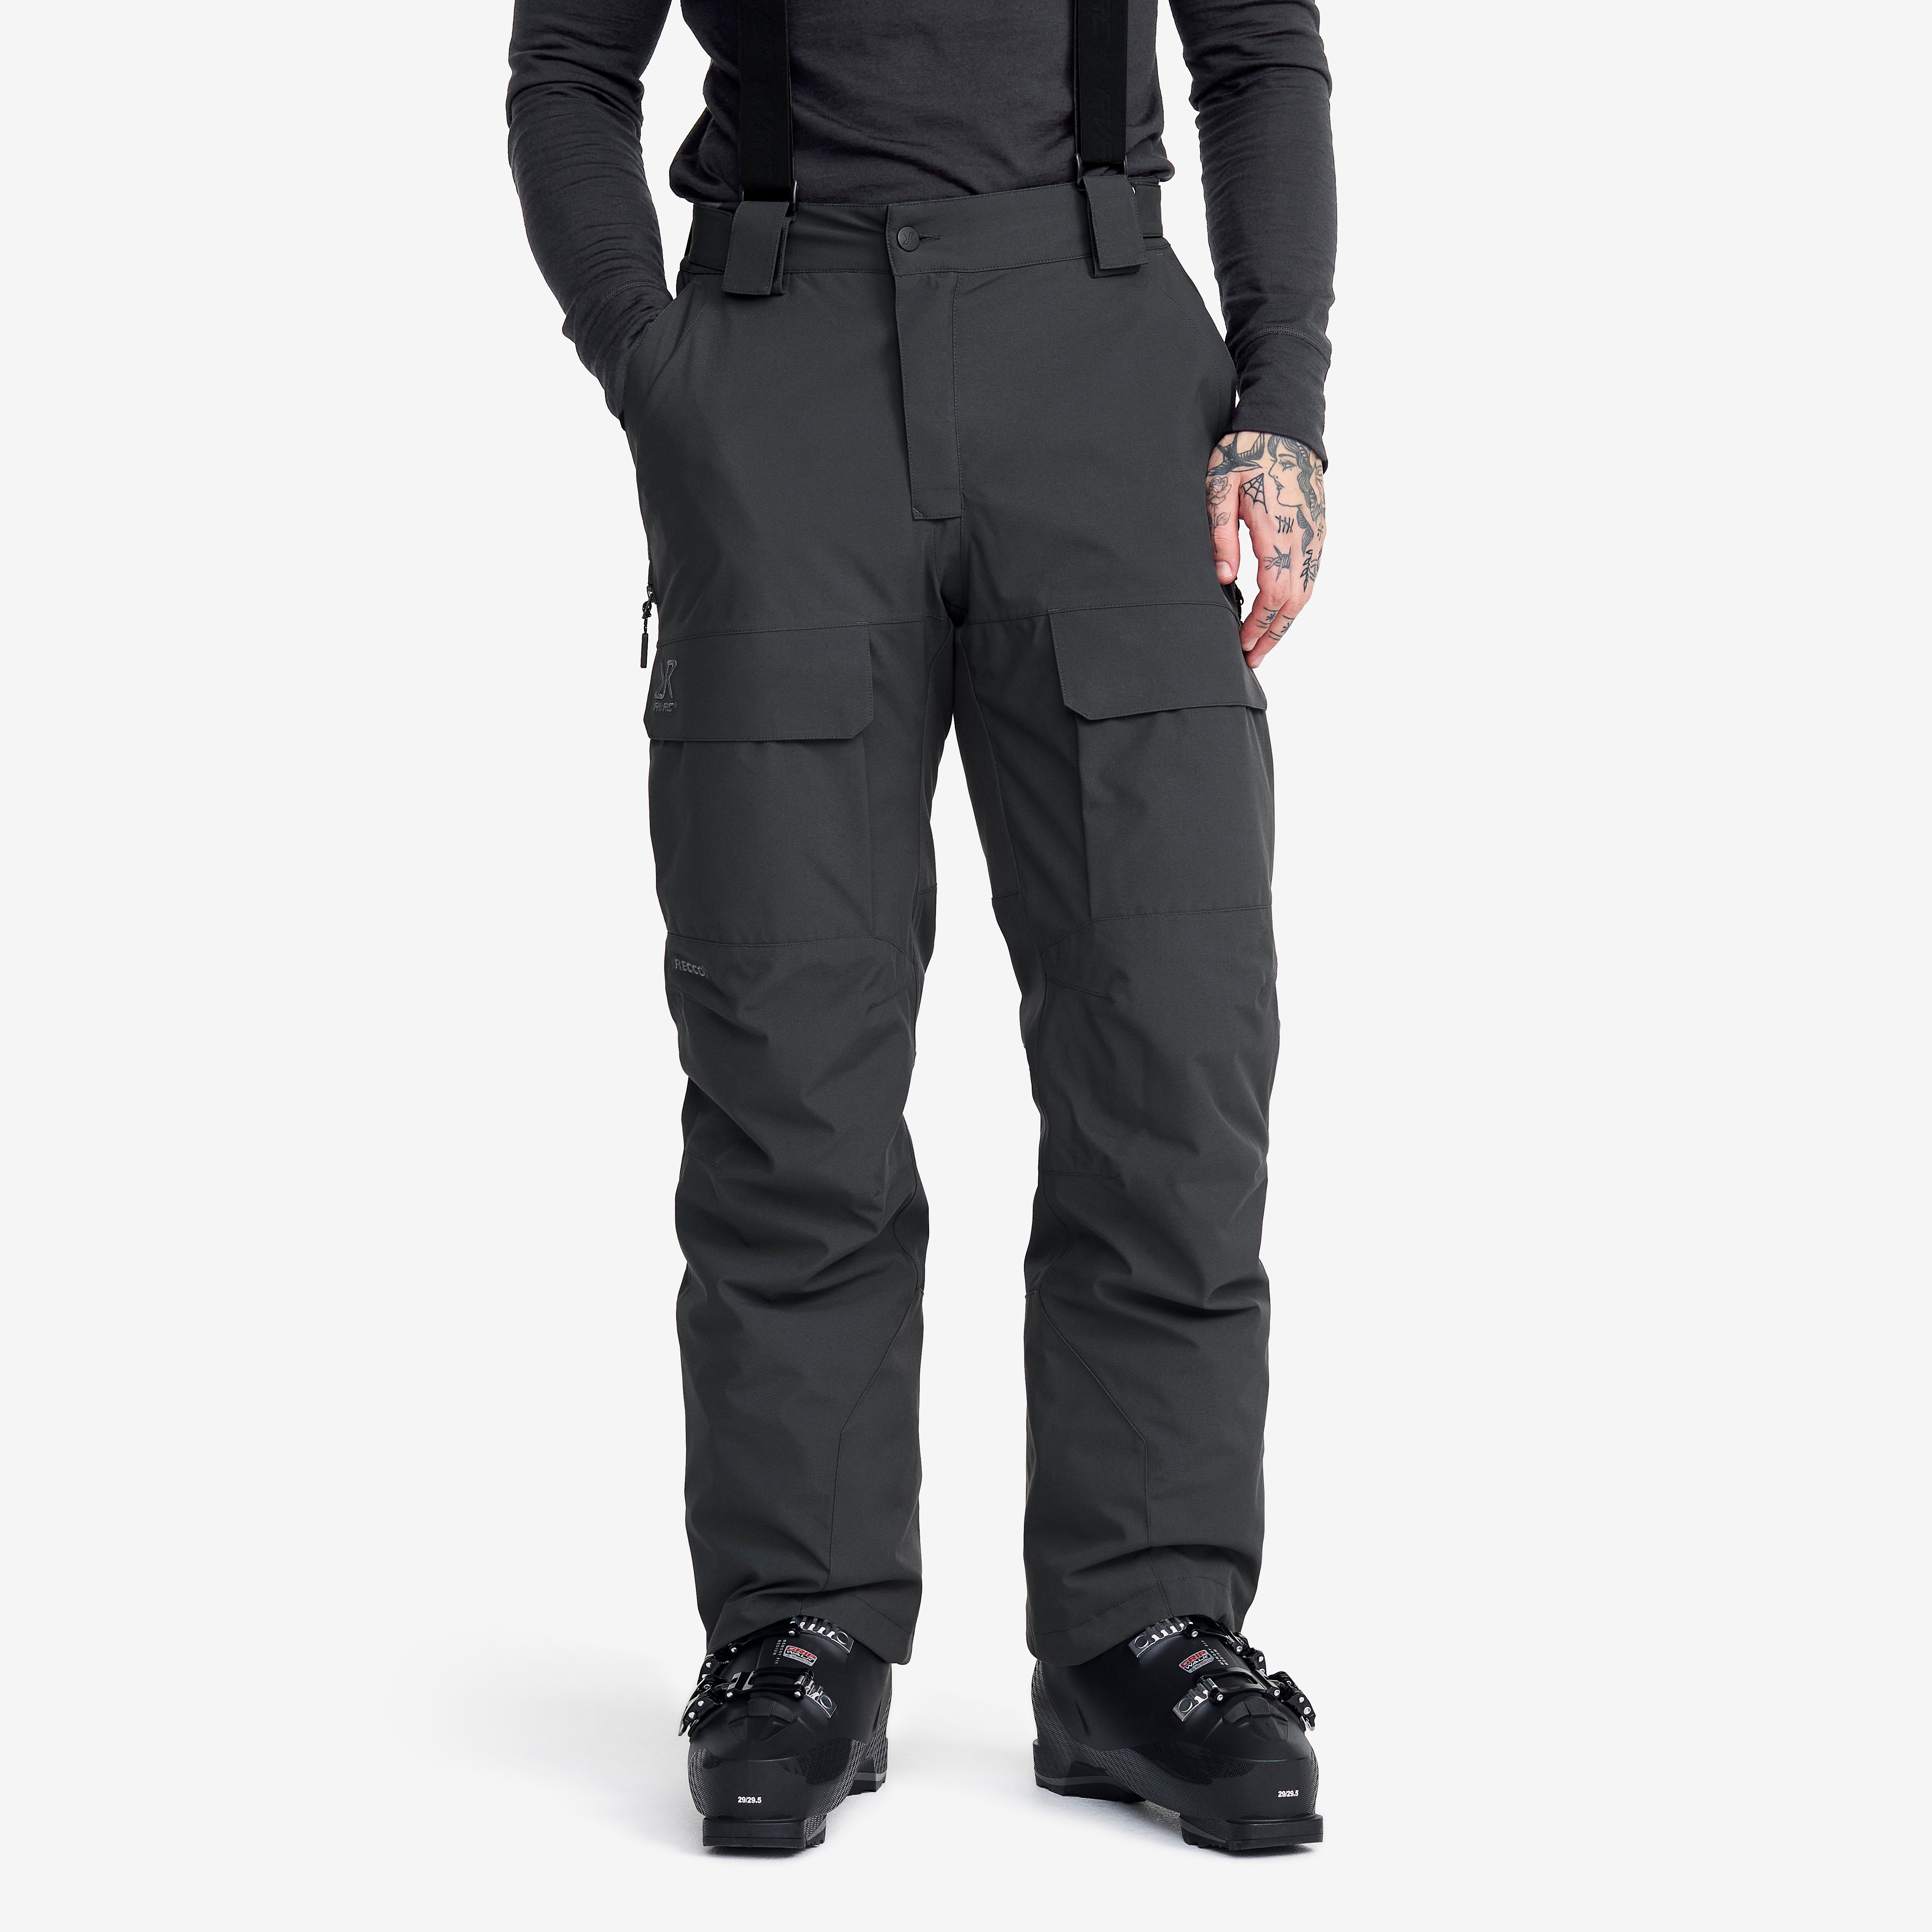 Halo 2L Insulated Ski Pants Anthracite Homme